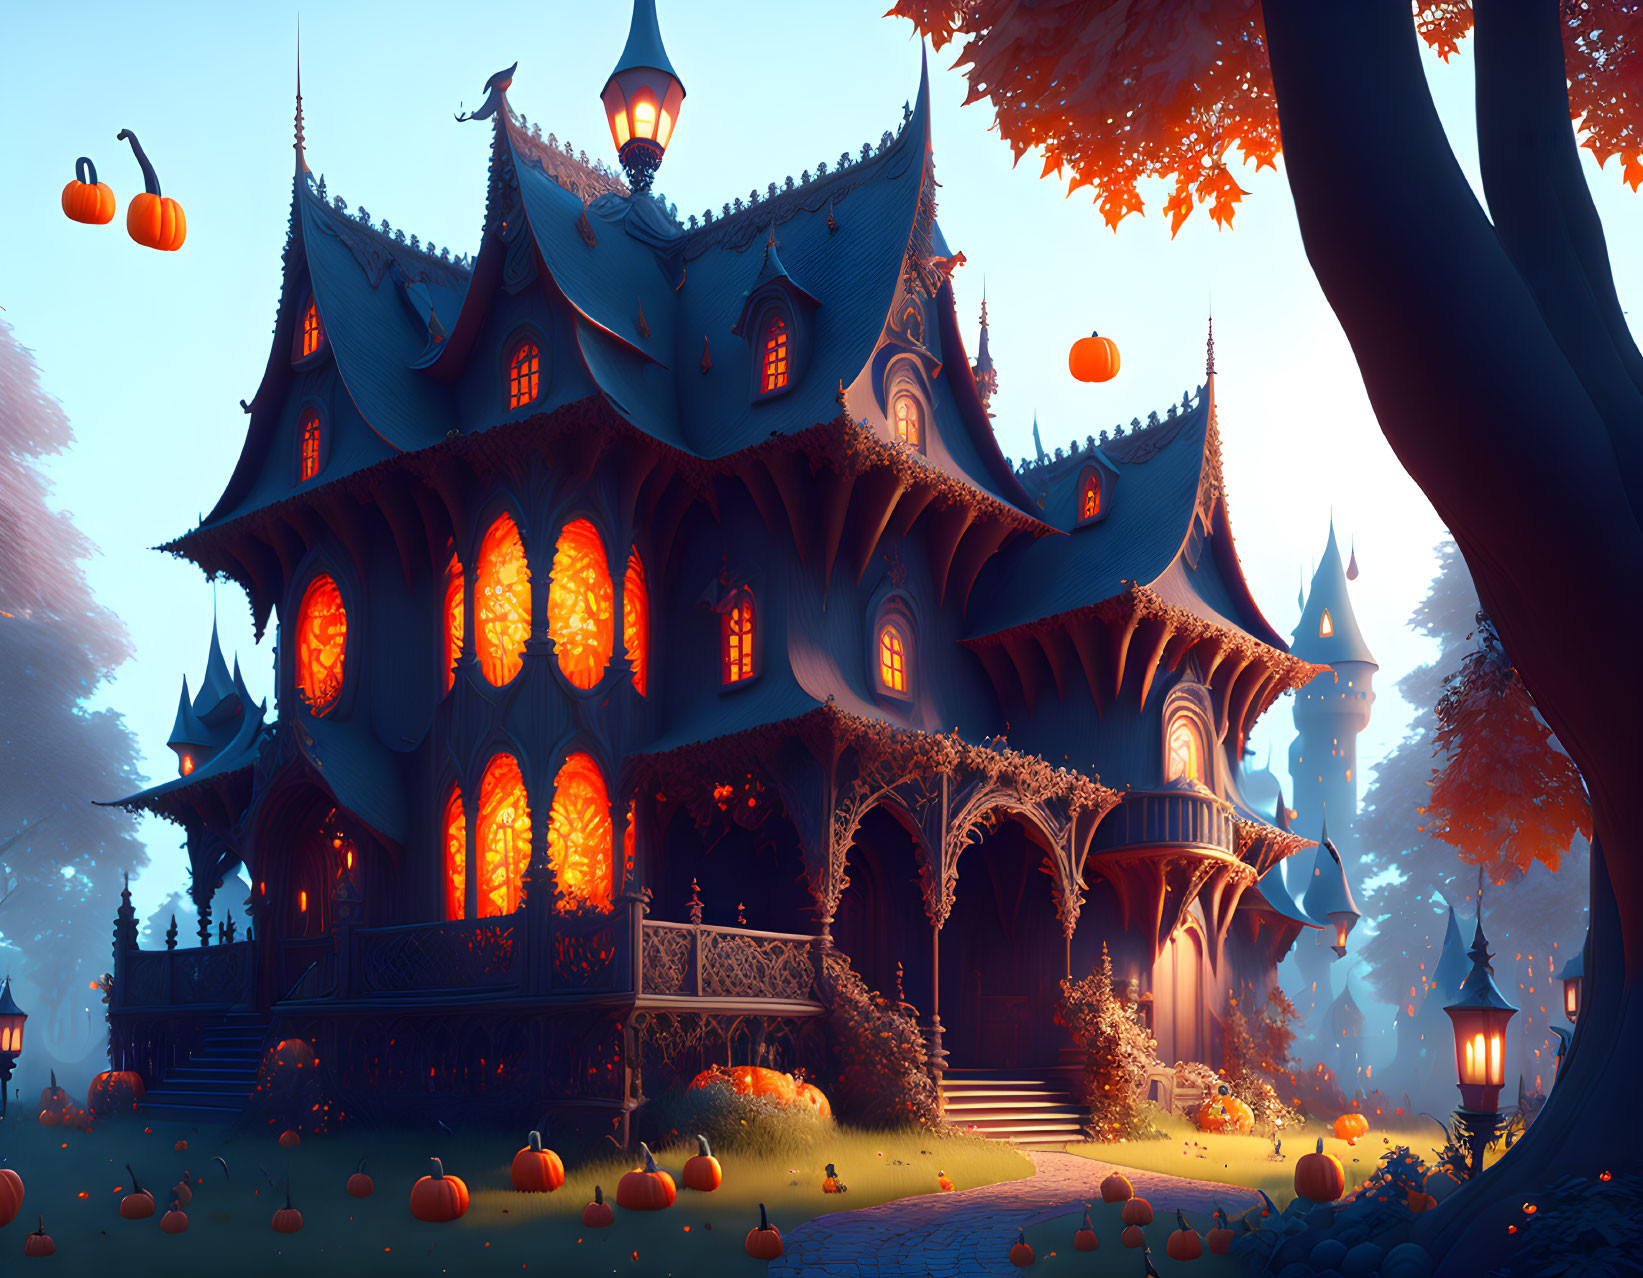 Eerie Gothic mansion in autumnal setting with floating pumpkins